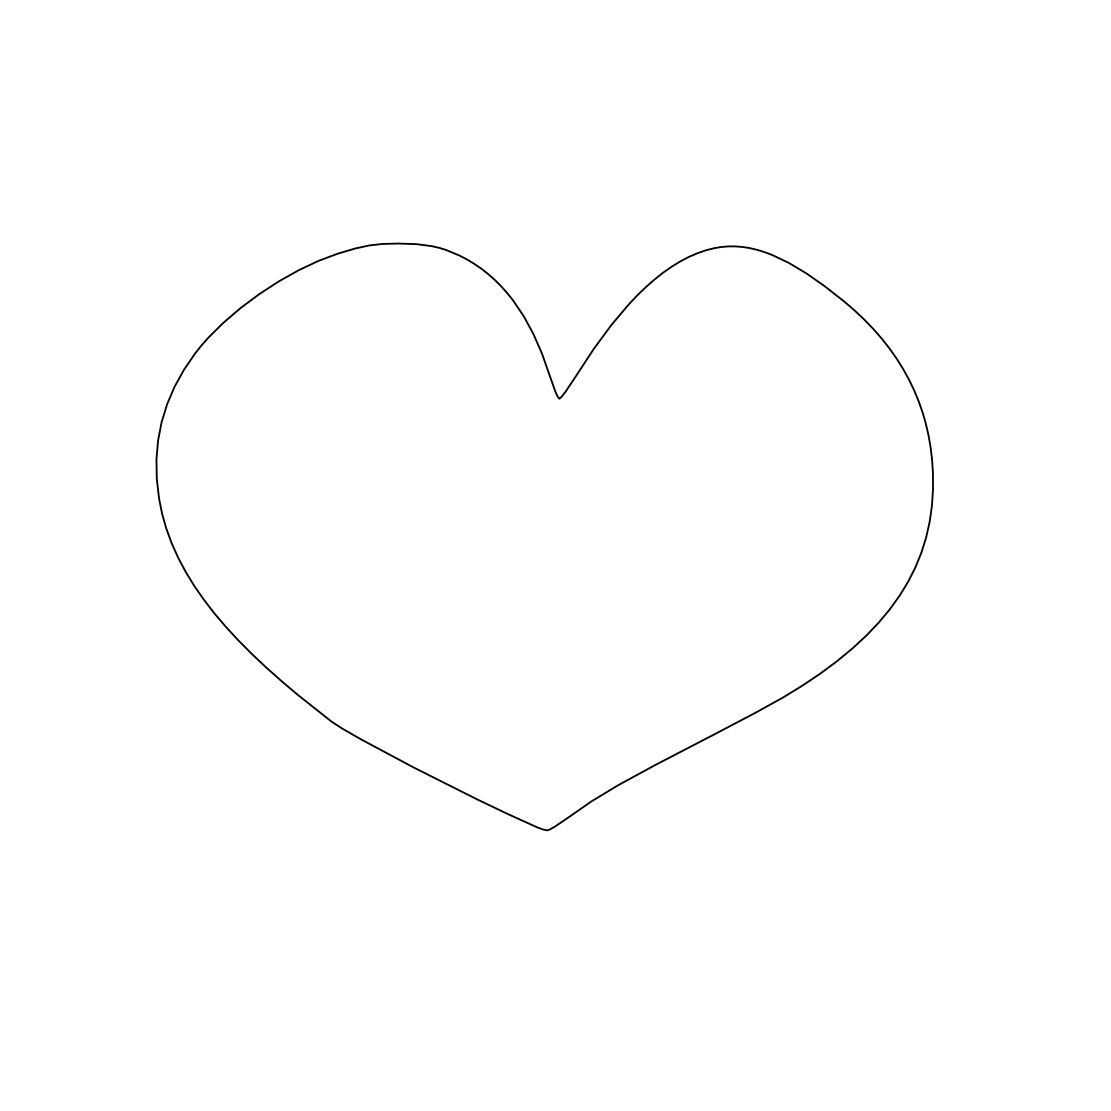 Heart Clip Art Black And White Free Cliparts That You Can Download To